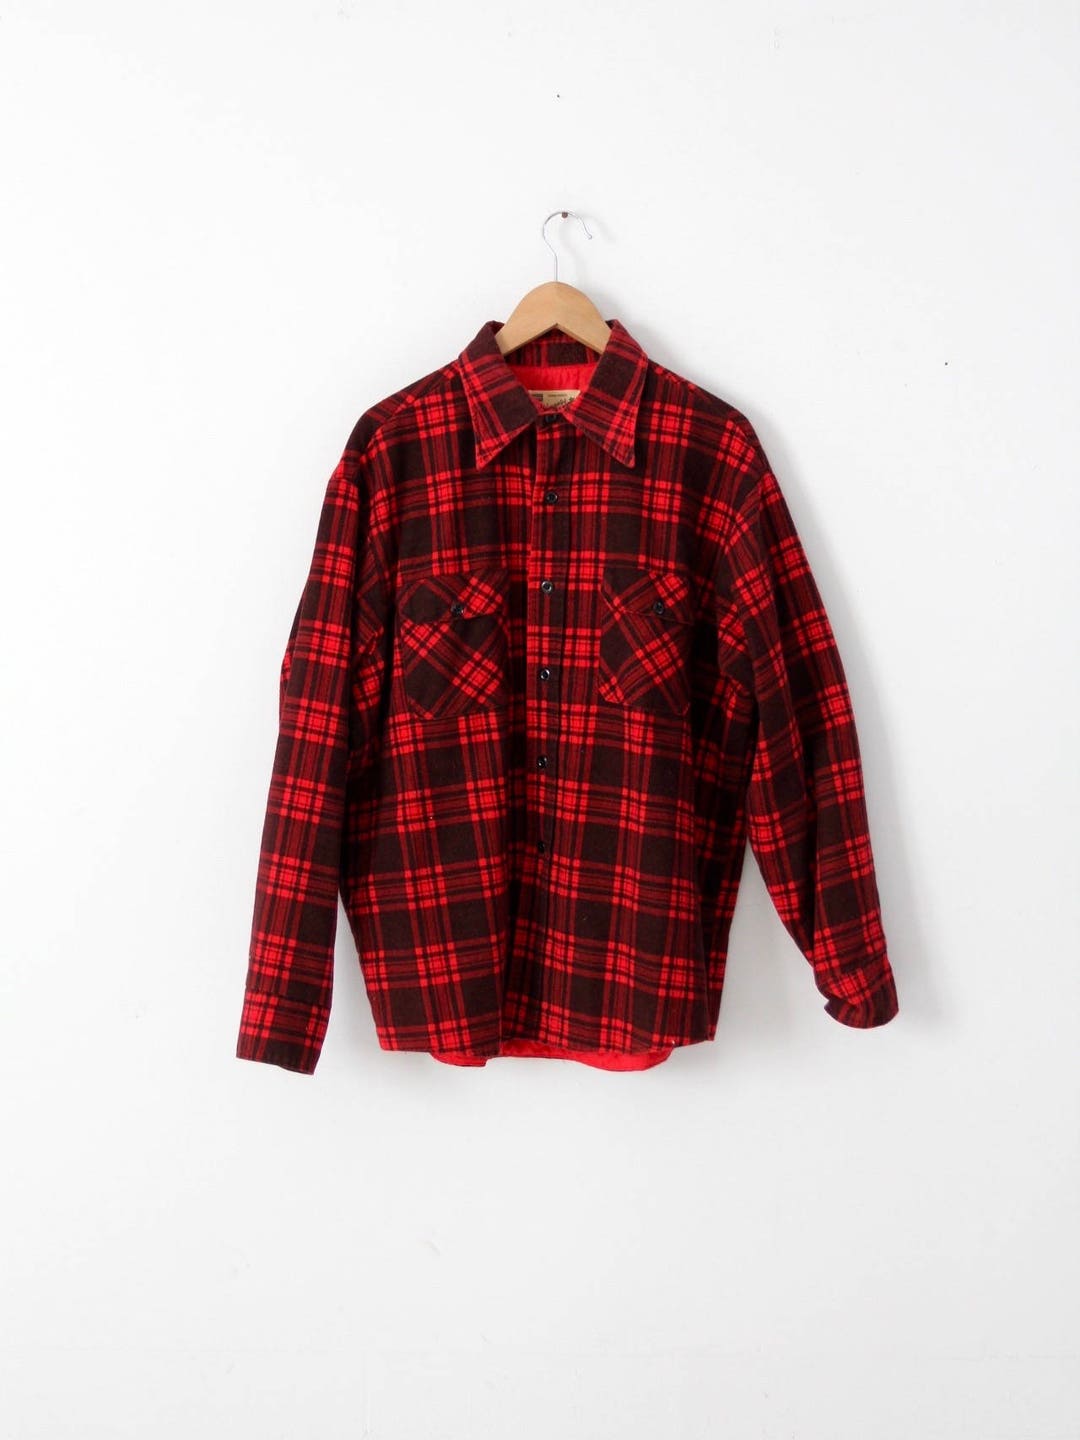 Vintage Plaid Jacket Red and Black Jacket by Sears - Etsy